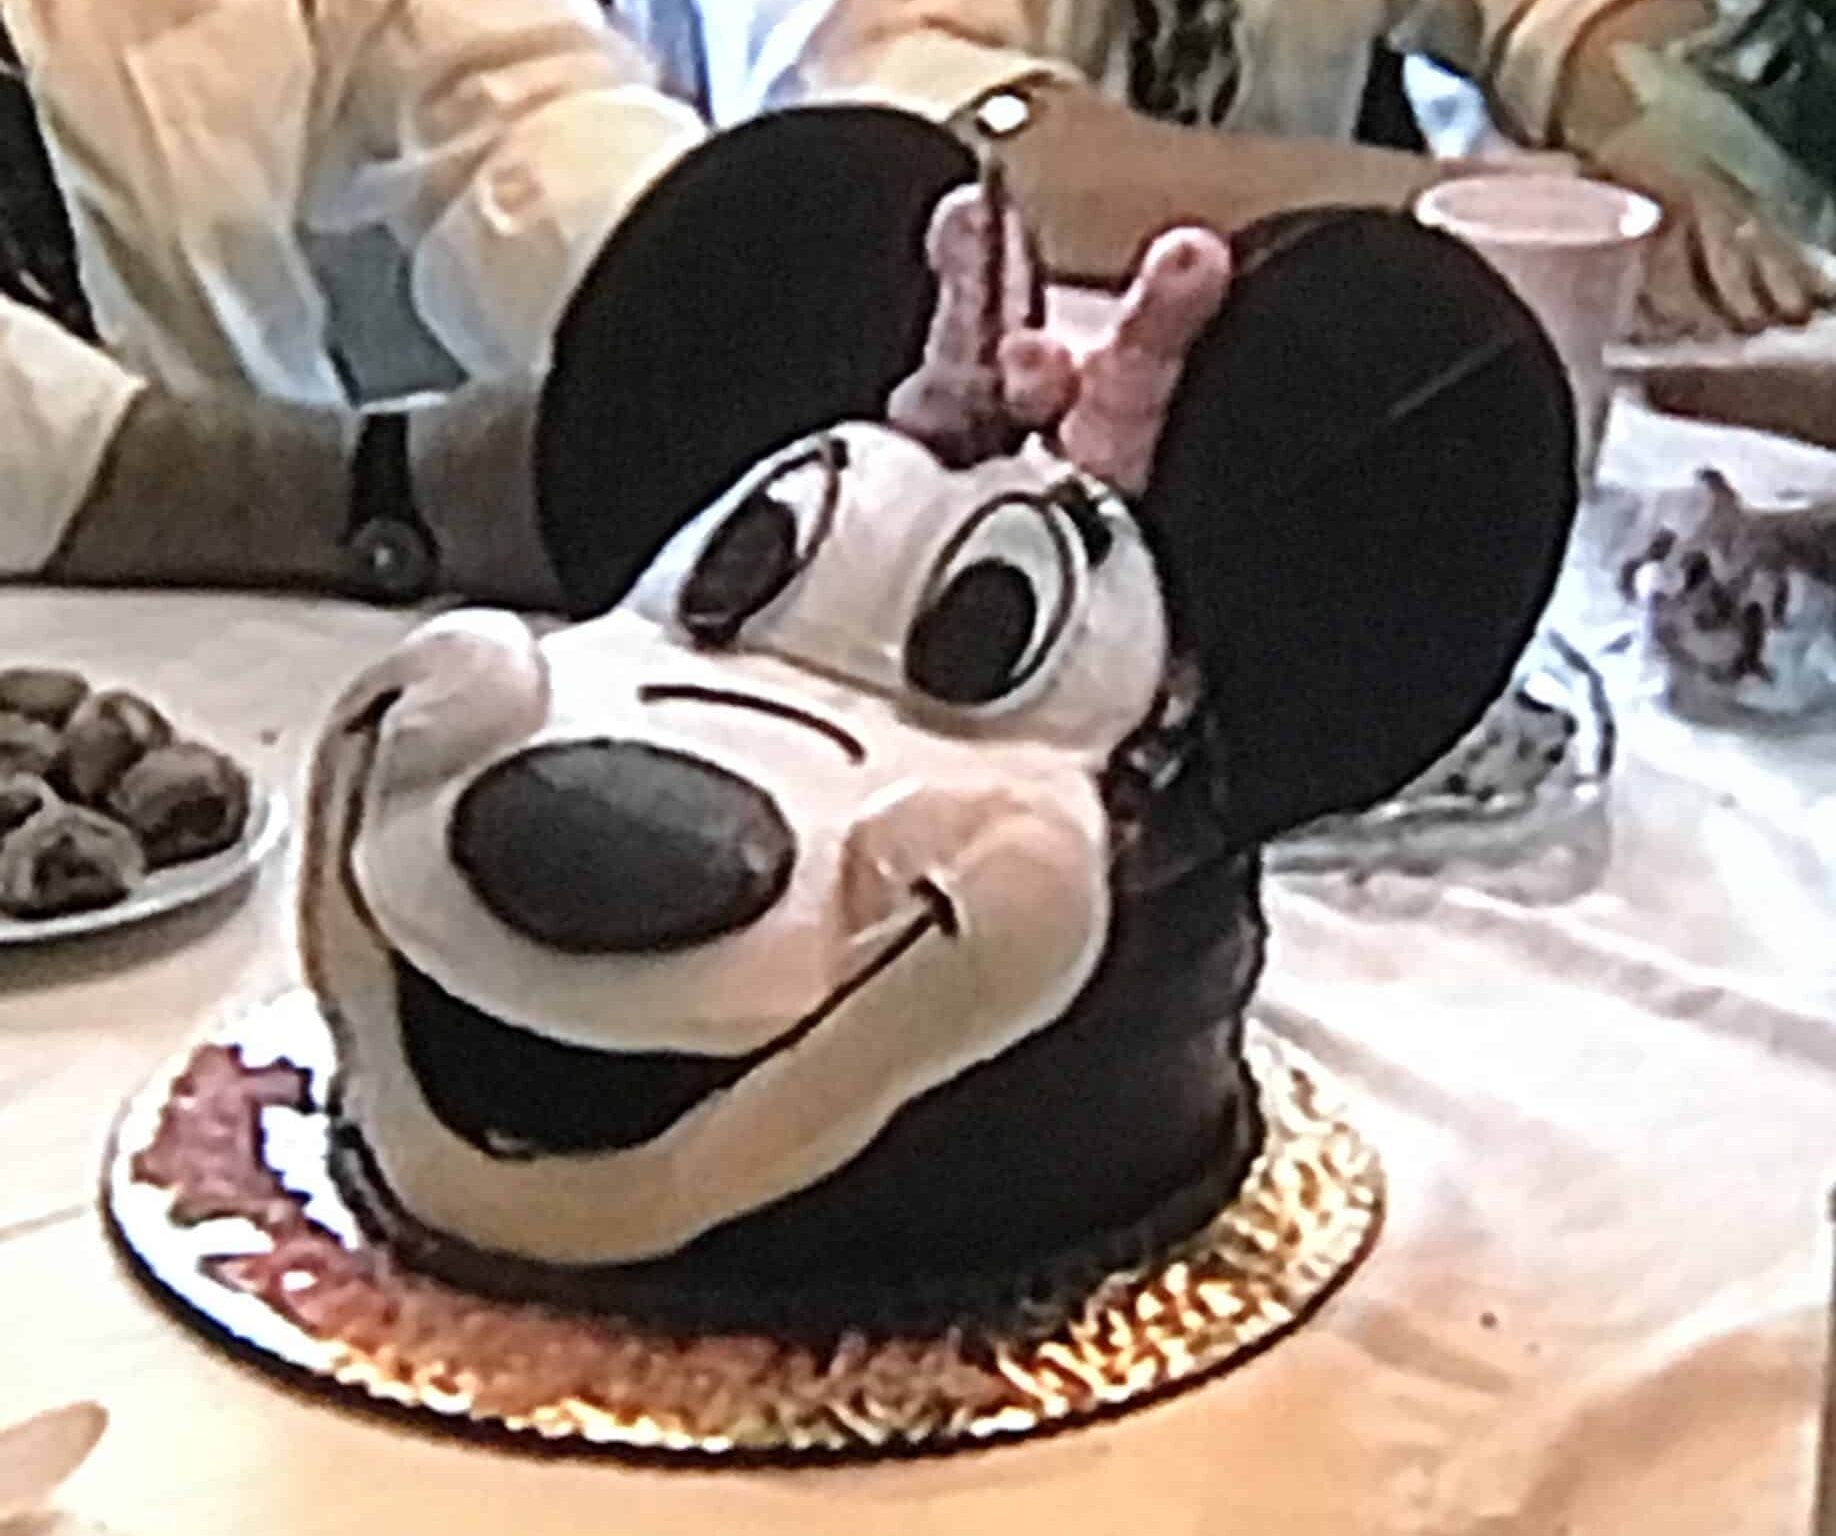 A home-made Micky Mouse cake in the 90s